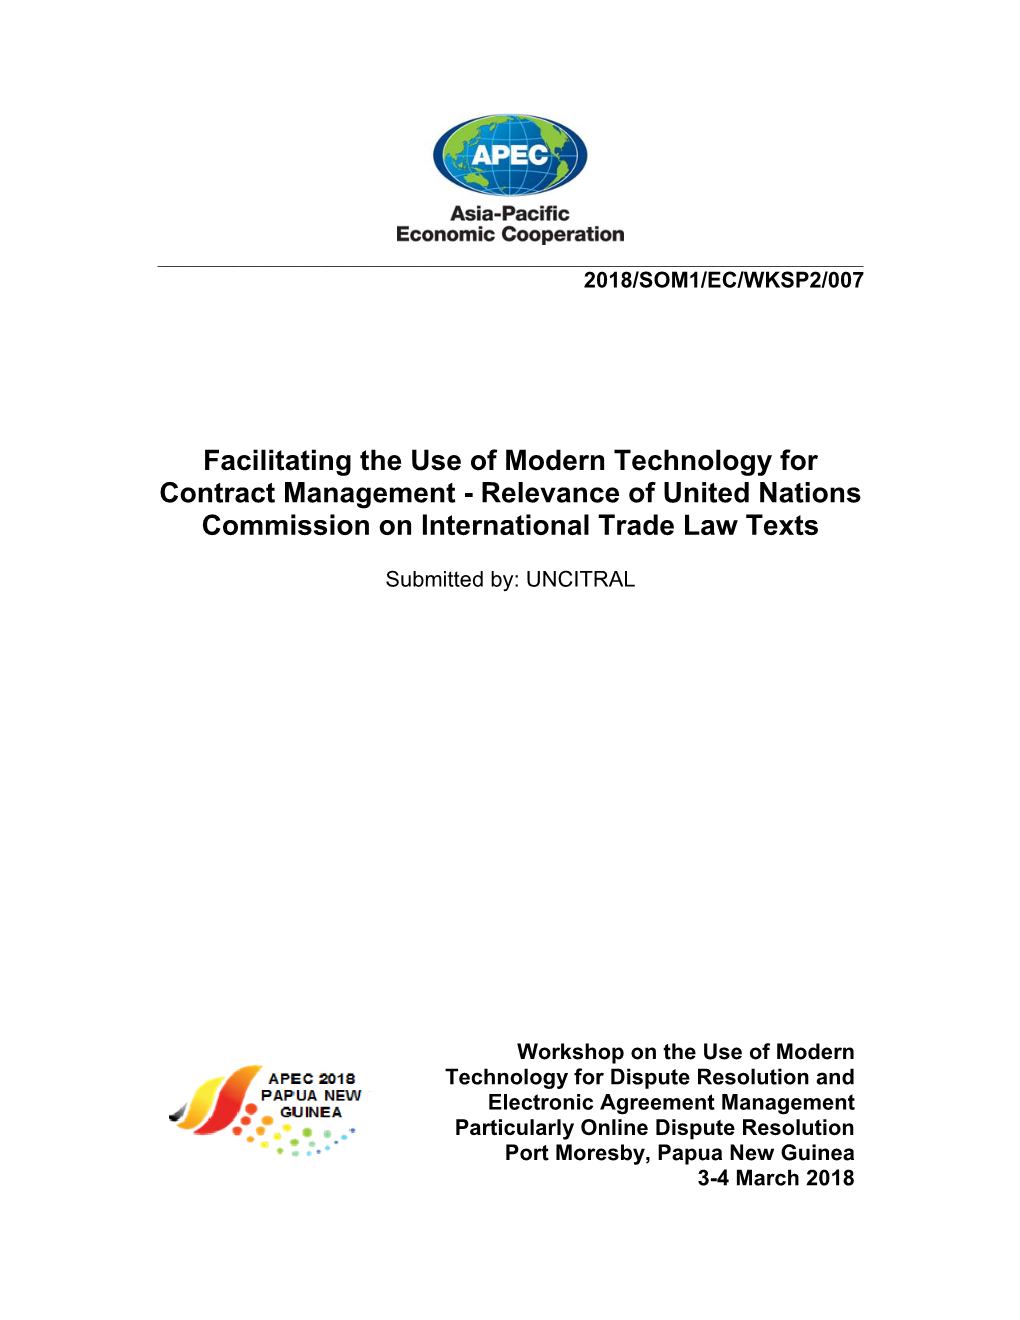 Contract Management - Relevance of United Nations Commission on International Trade Law Texts